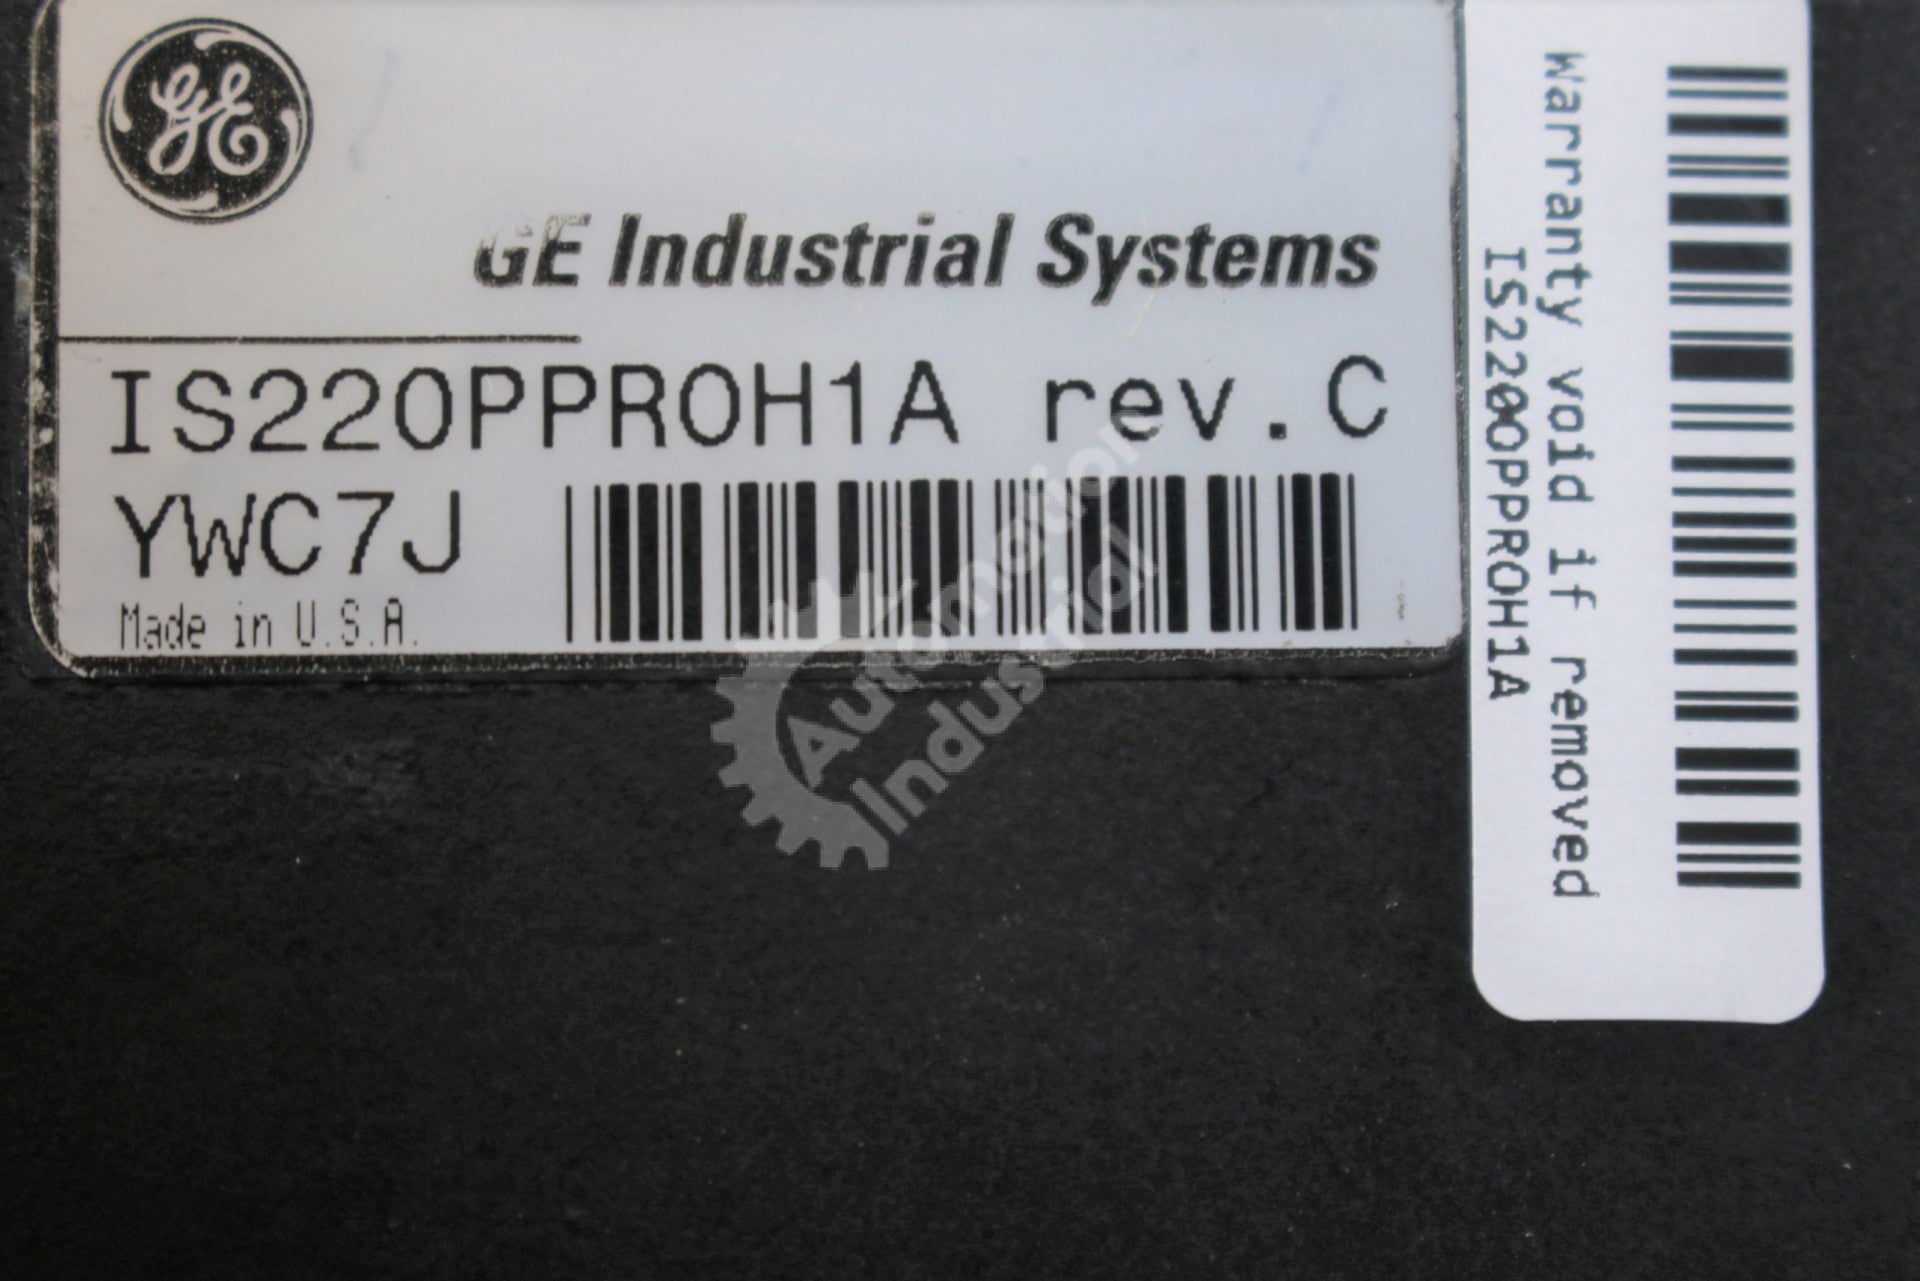 GE General Electric IS220PPROH1A REV. C LAN Power Supply Mark VI